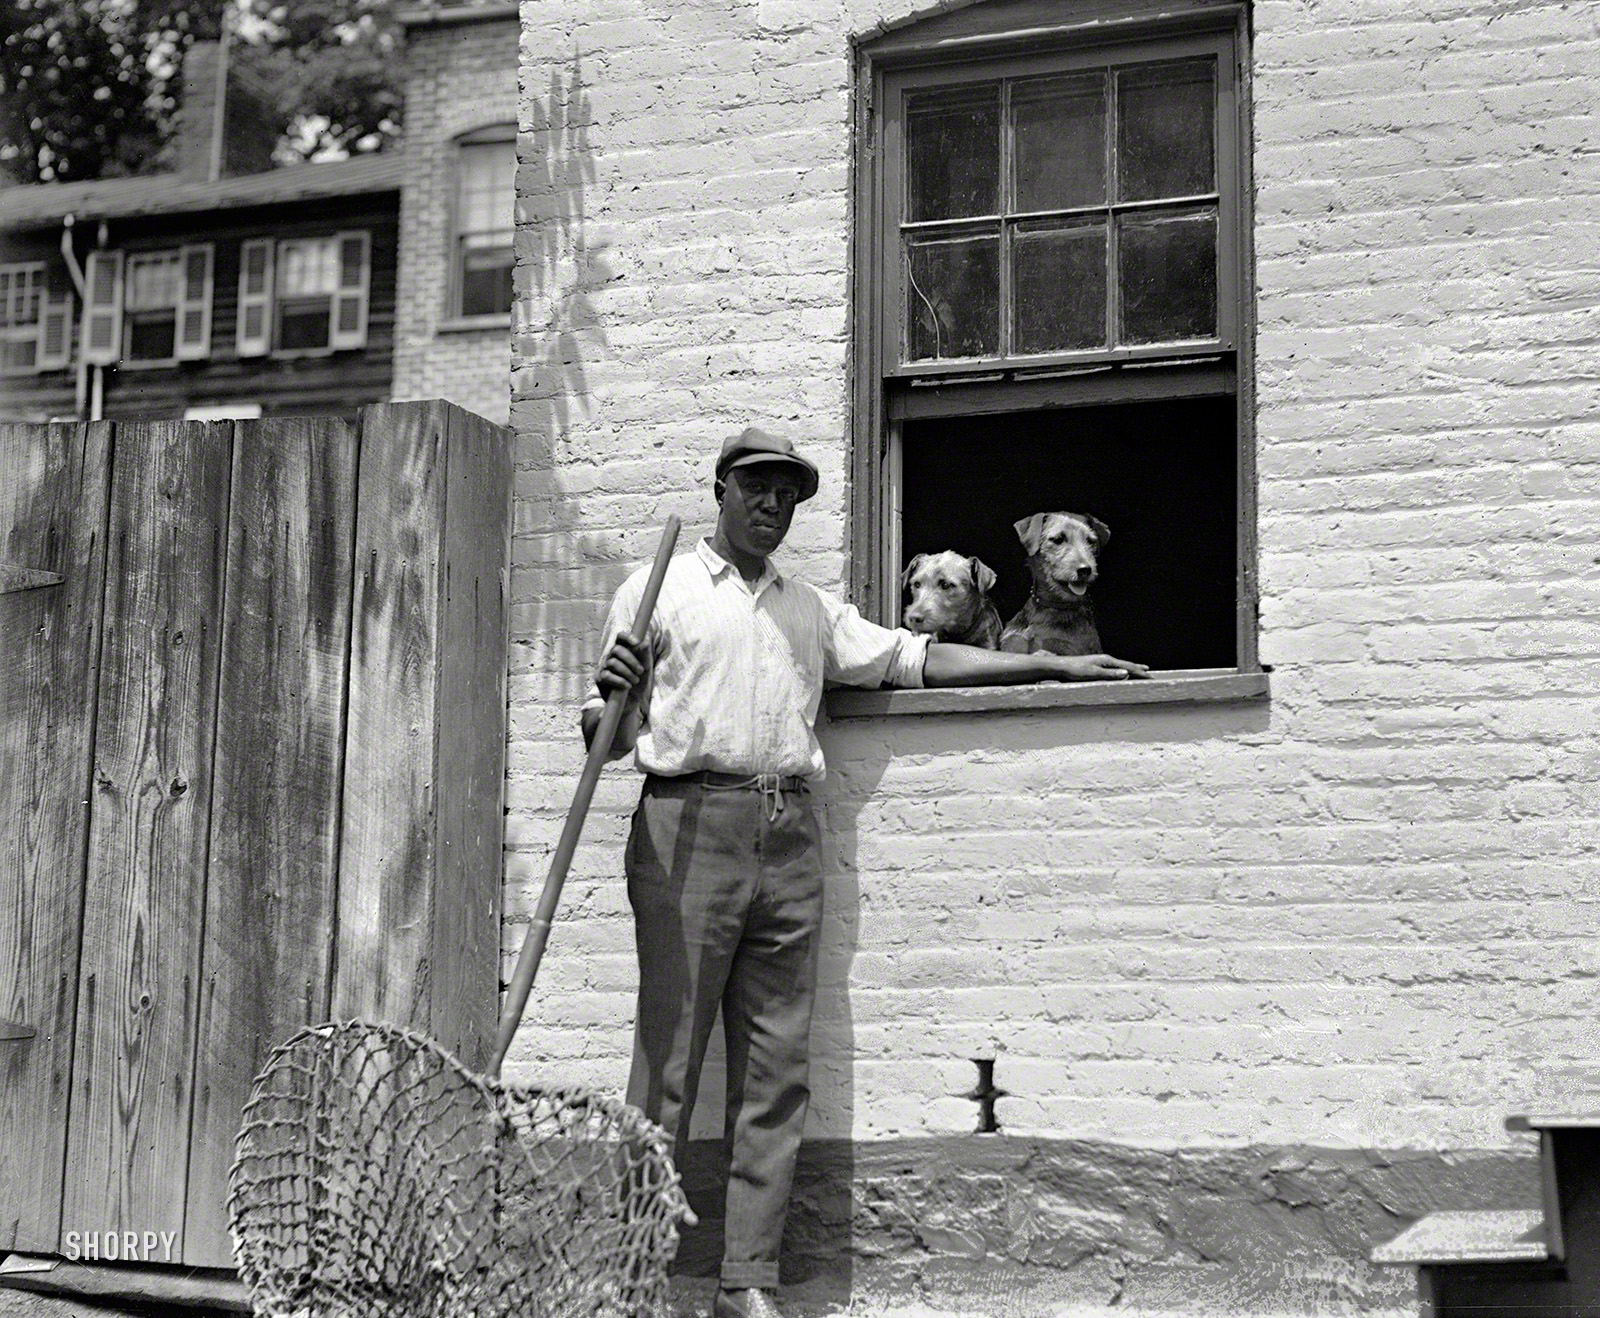 Washington, D.C., 1924. "Dog catcher." Thwarted, at least for the moment, by jurisdictional issues. National Photo Company glass negative. View full size.